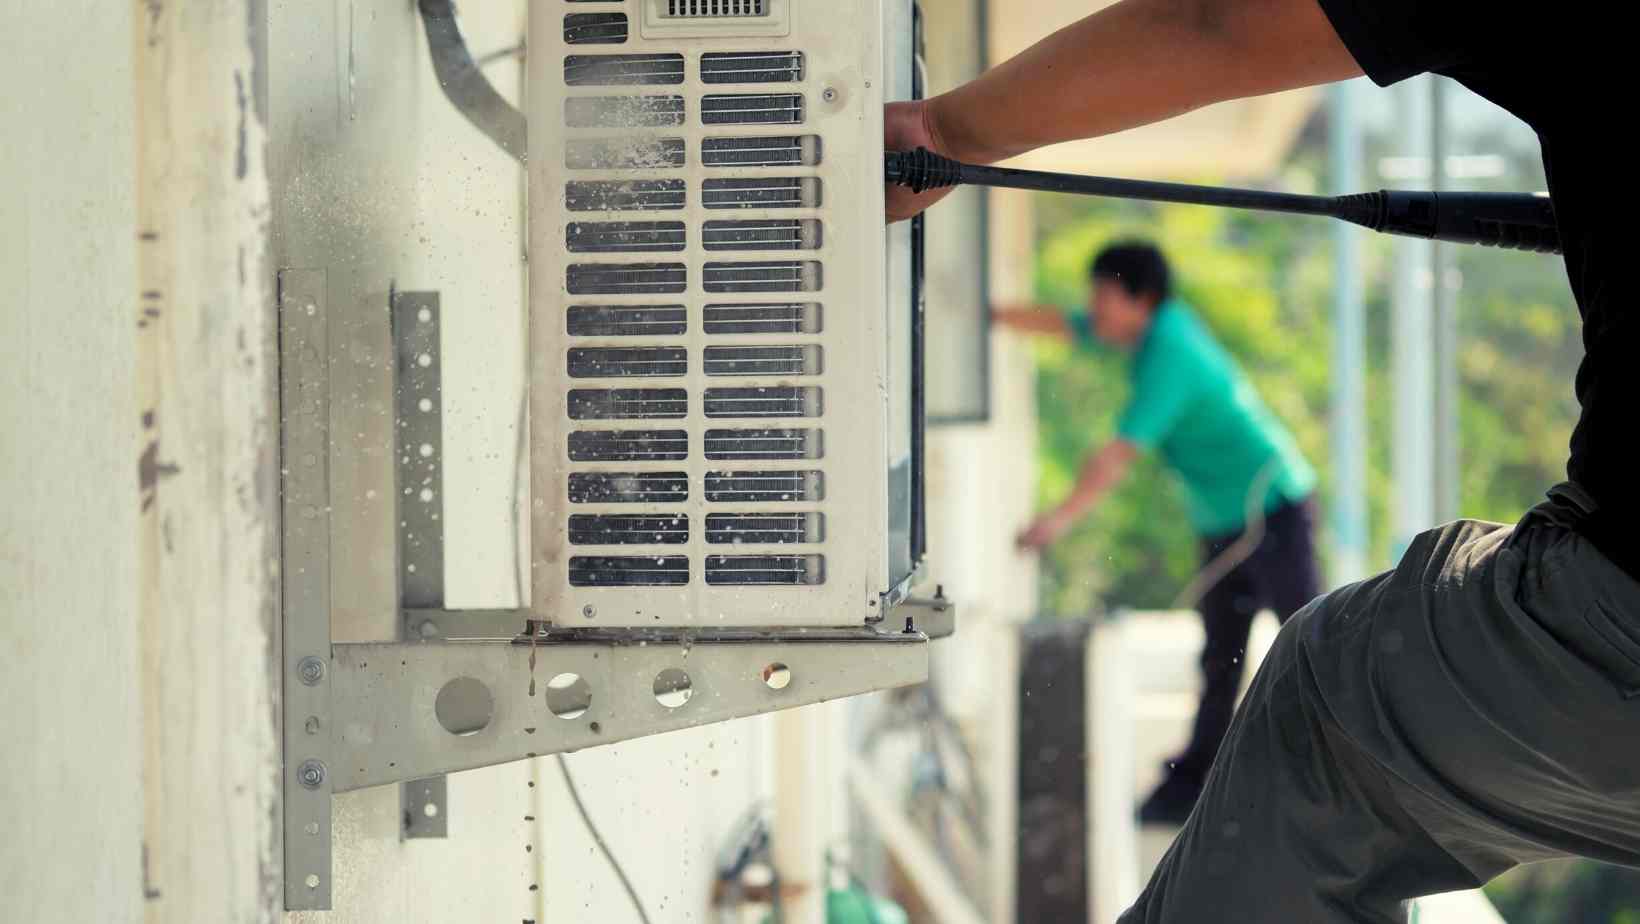 Air Conditioning Service in San Diego